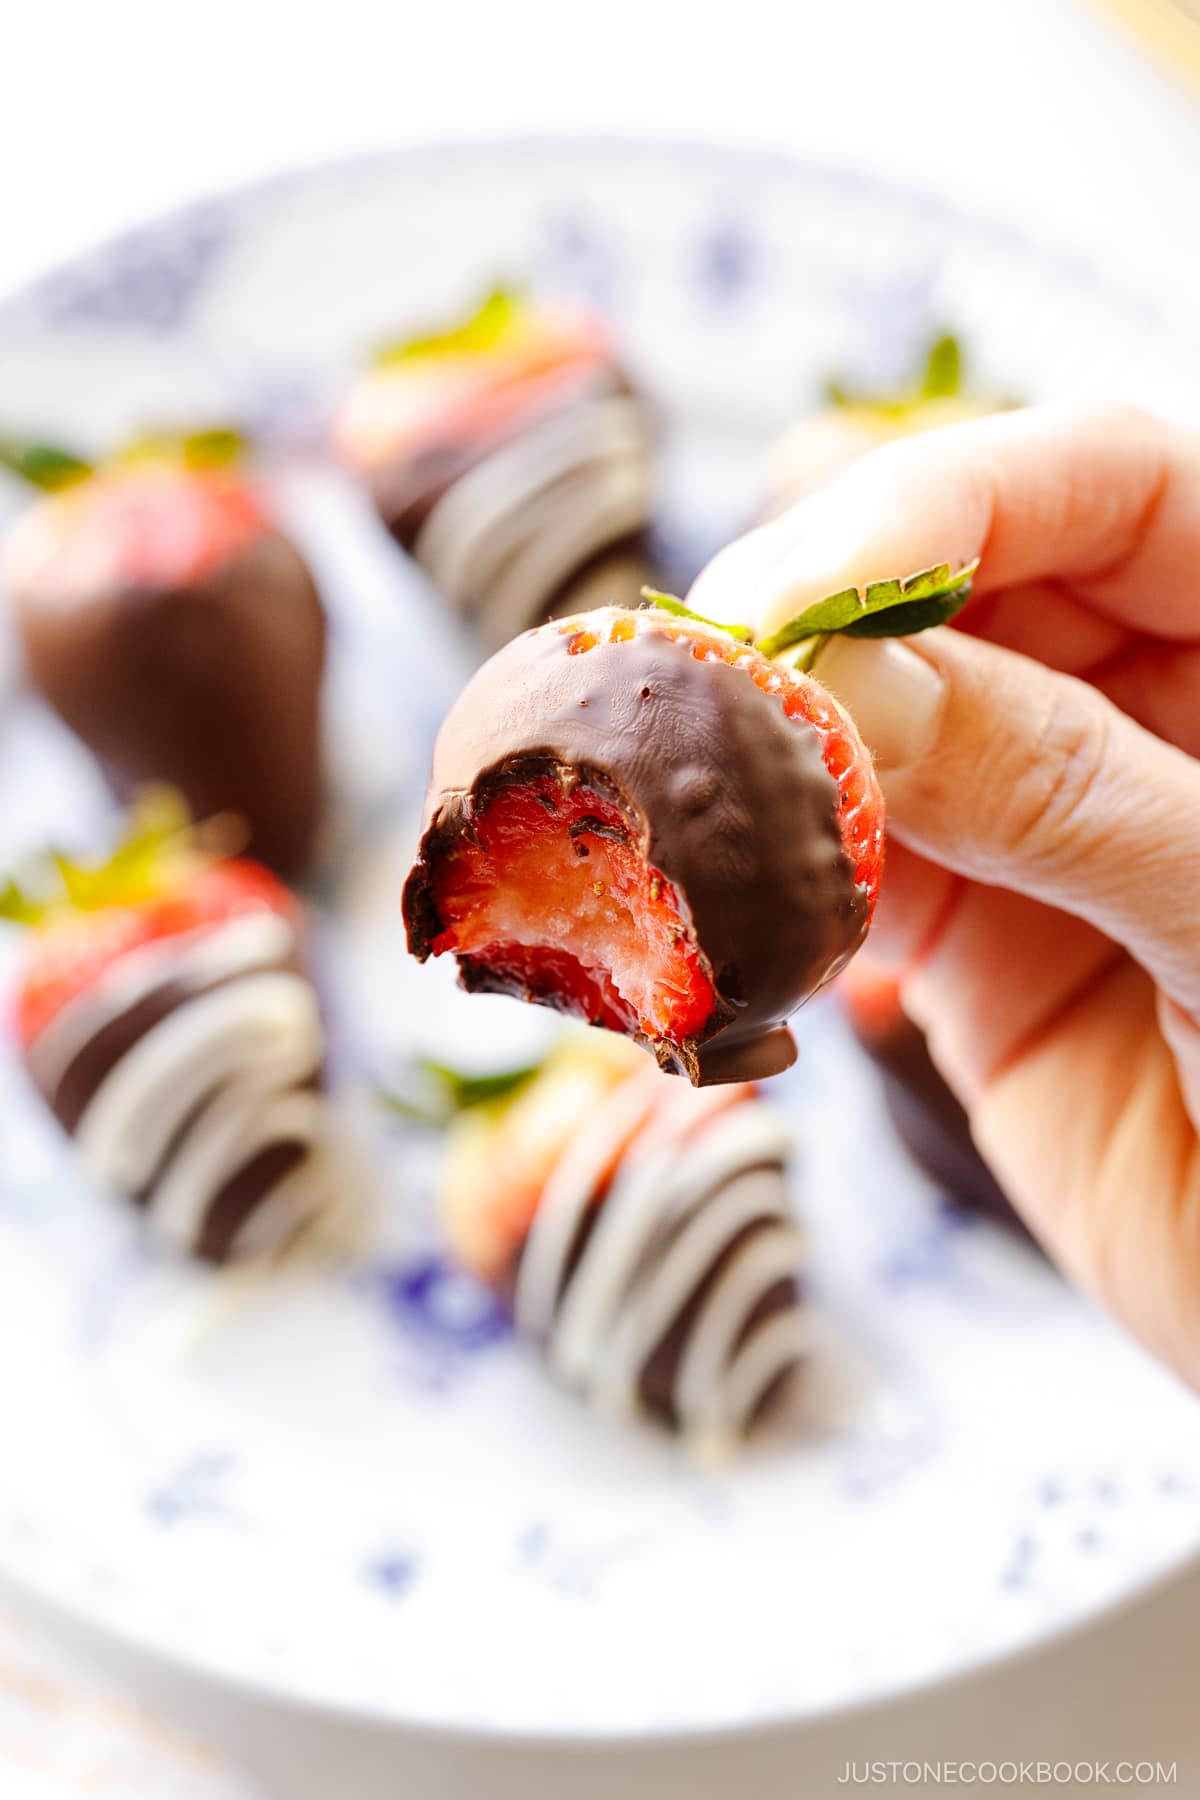 A little bite on homemade chocolate covered strawberries.